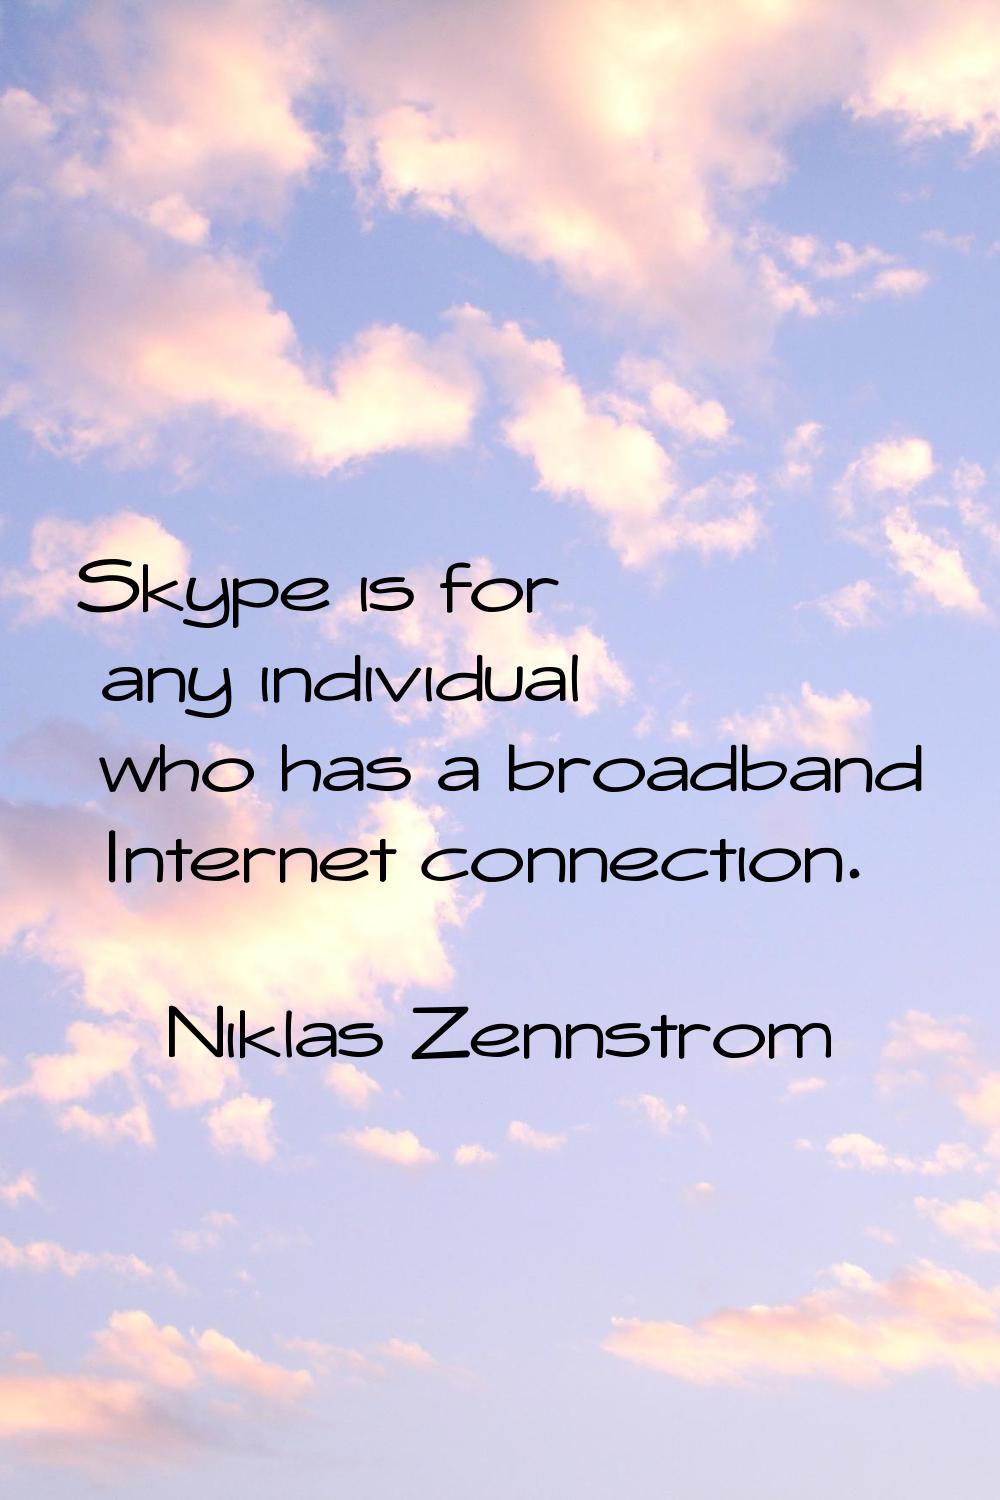 Skype is for any individual who has a broadband Internet connection.